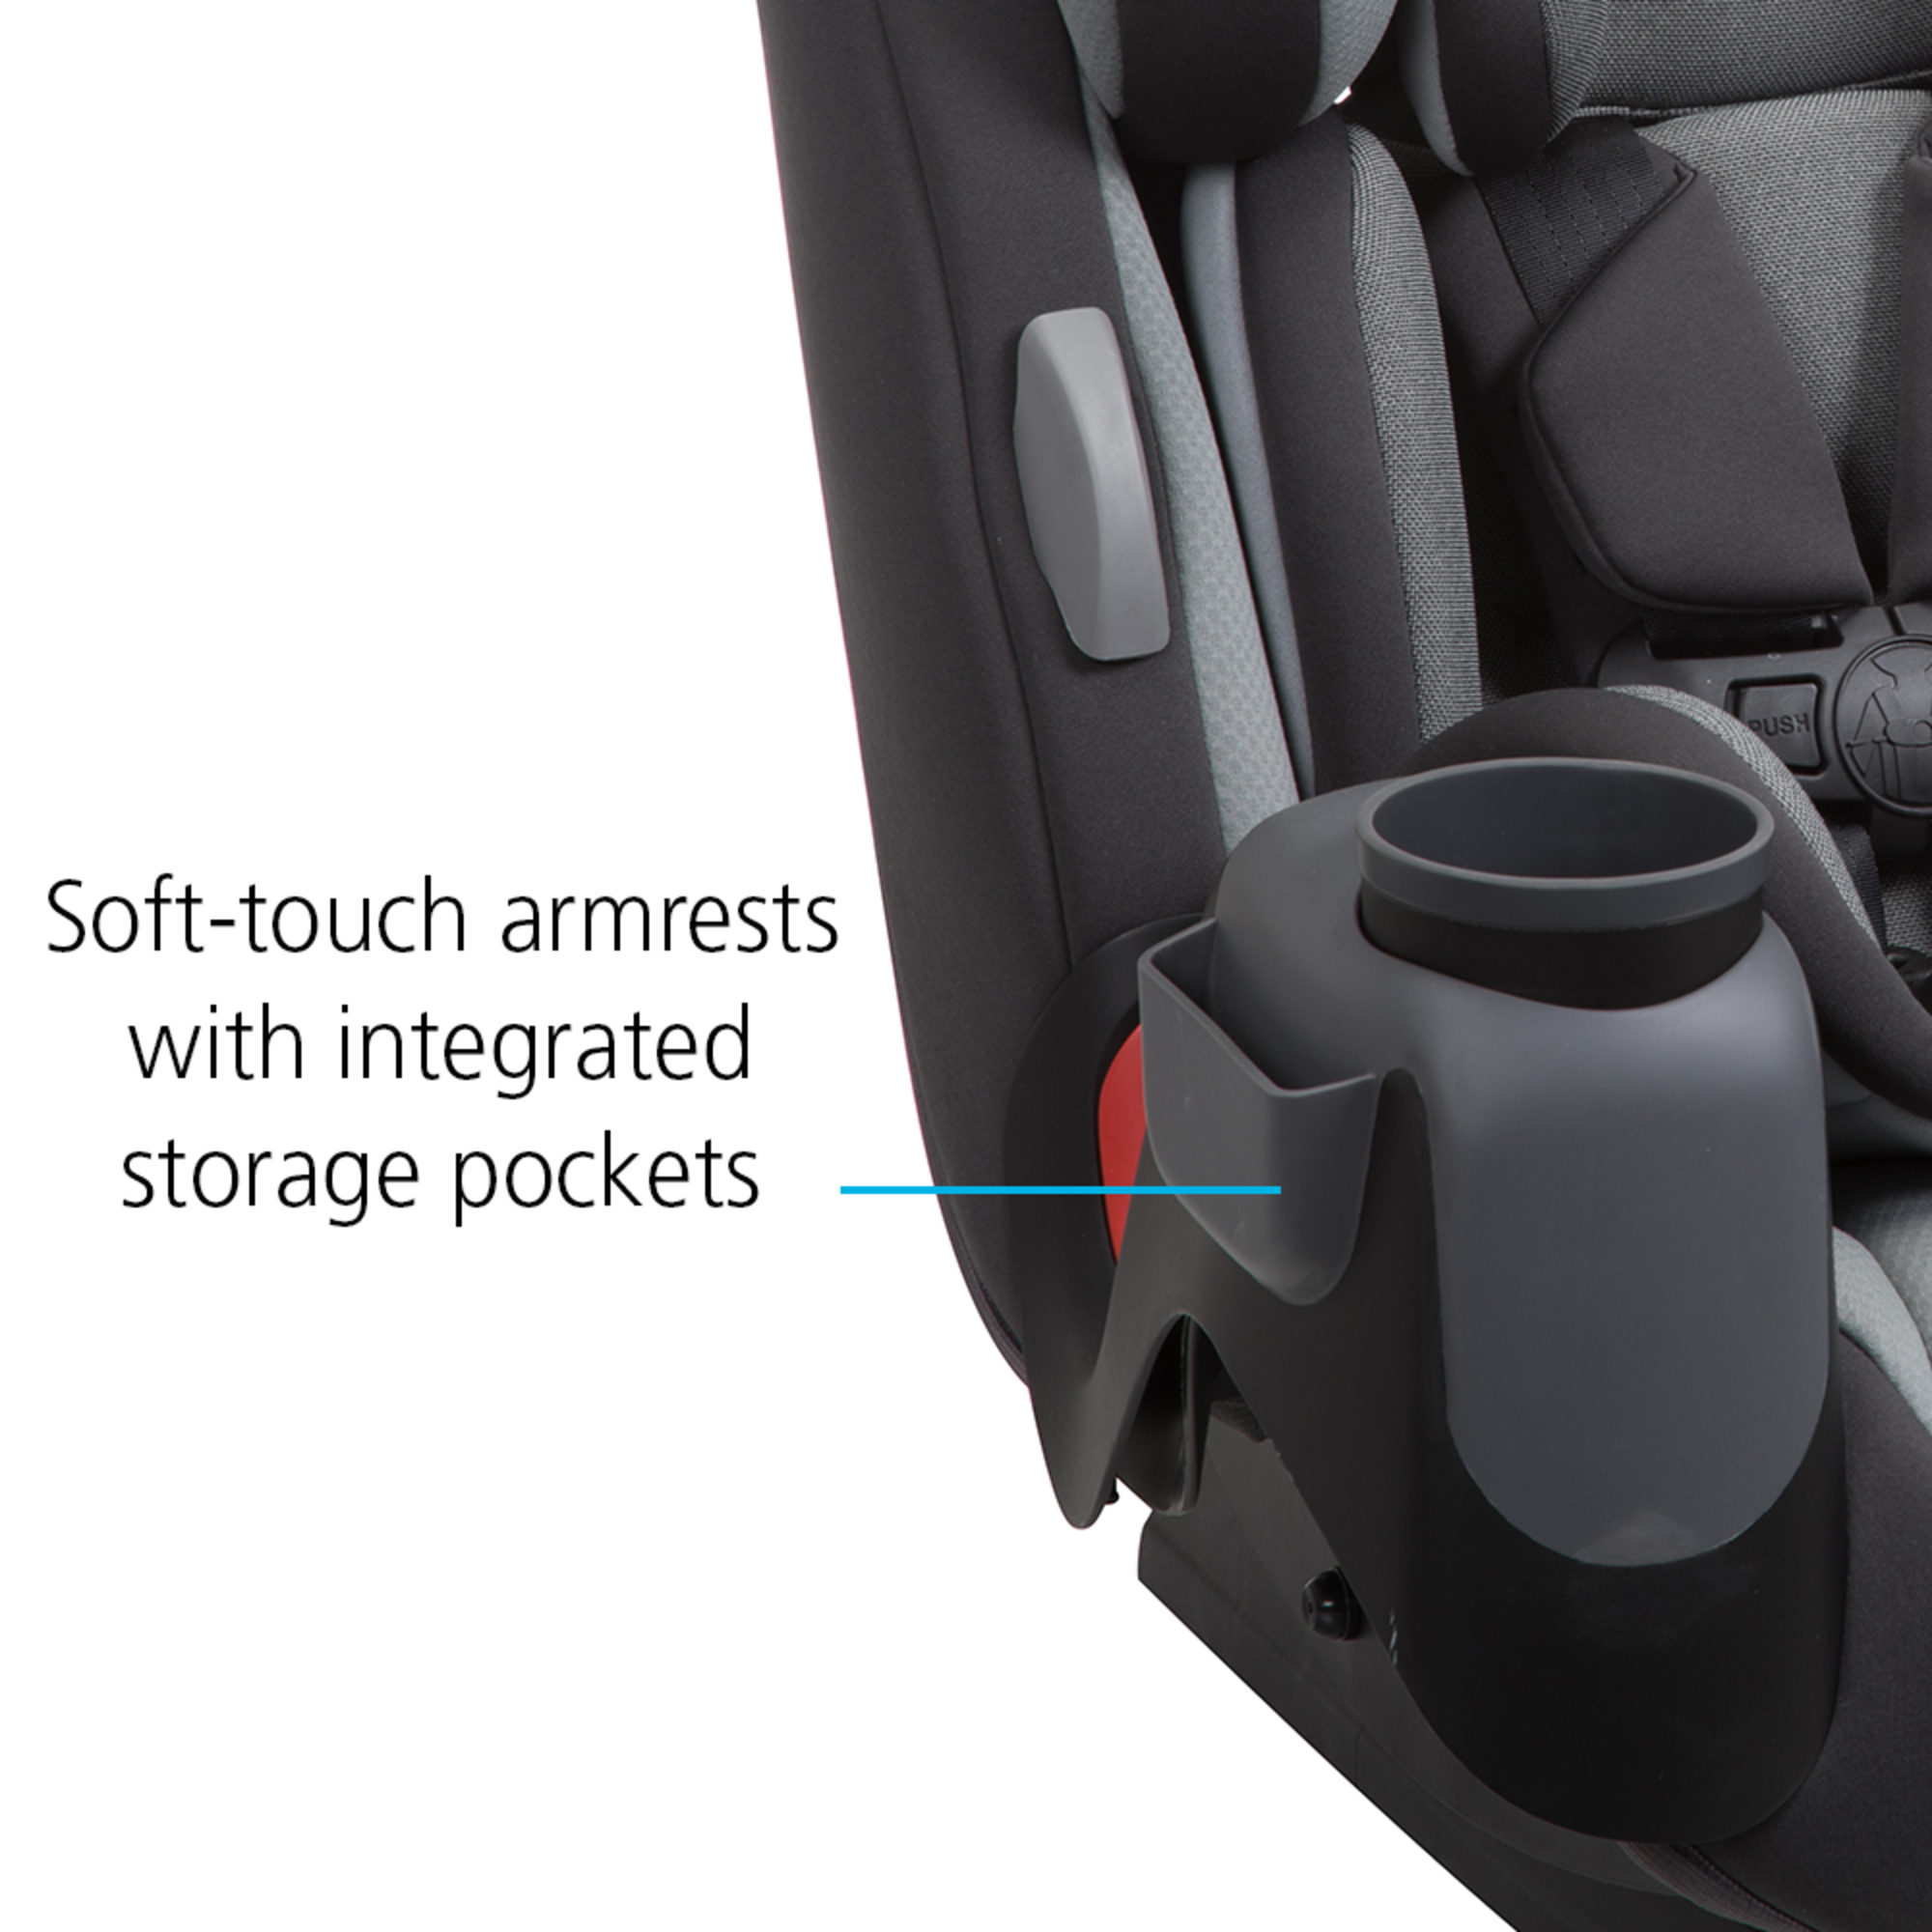 Soft-touch armrests on car seat with integrated storage pockets.